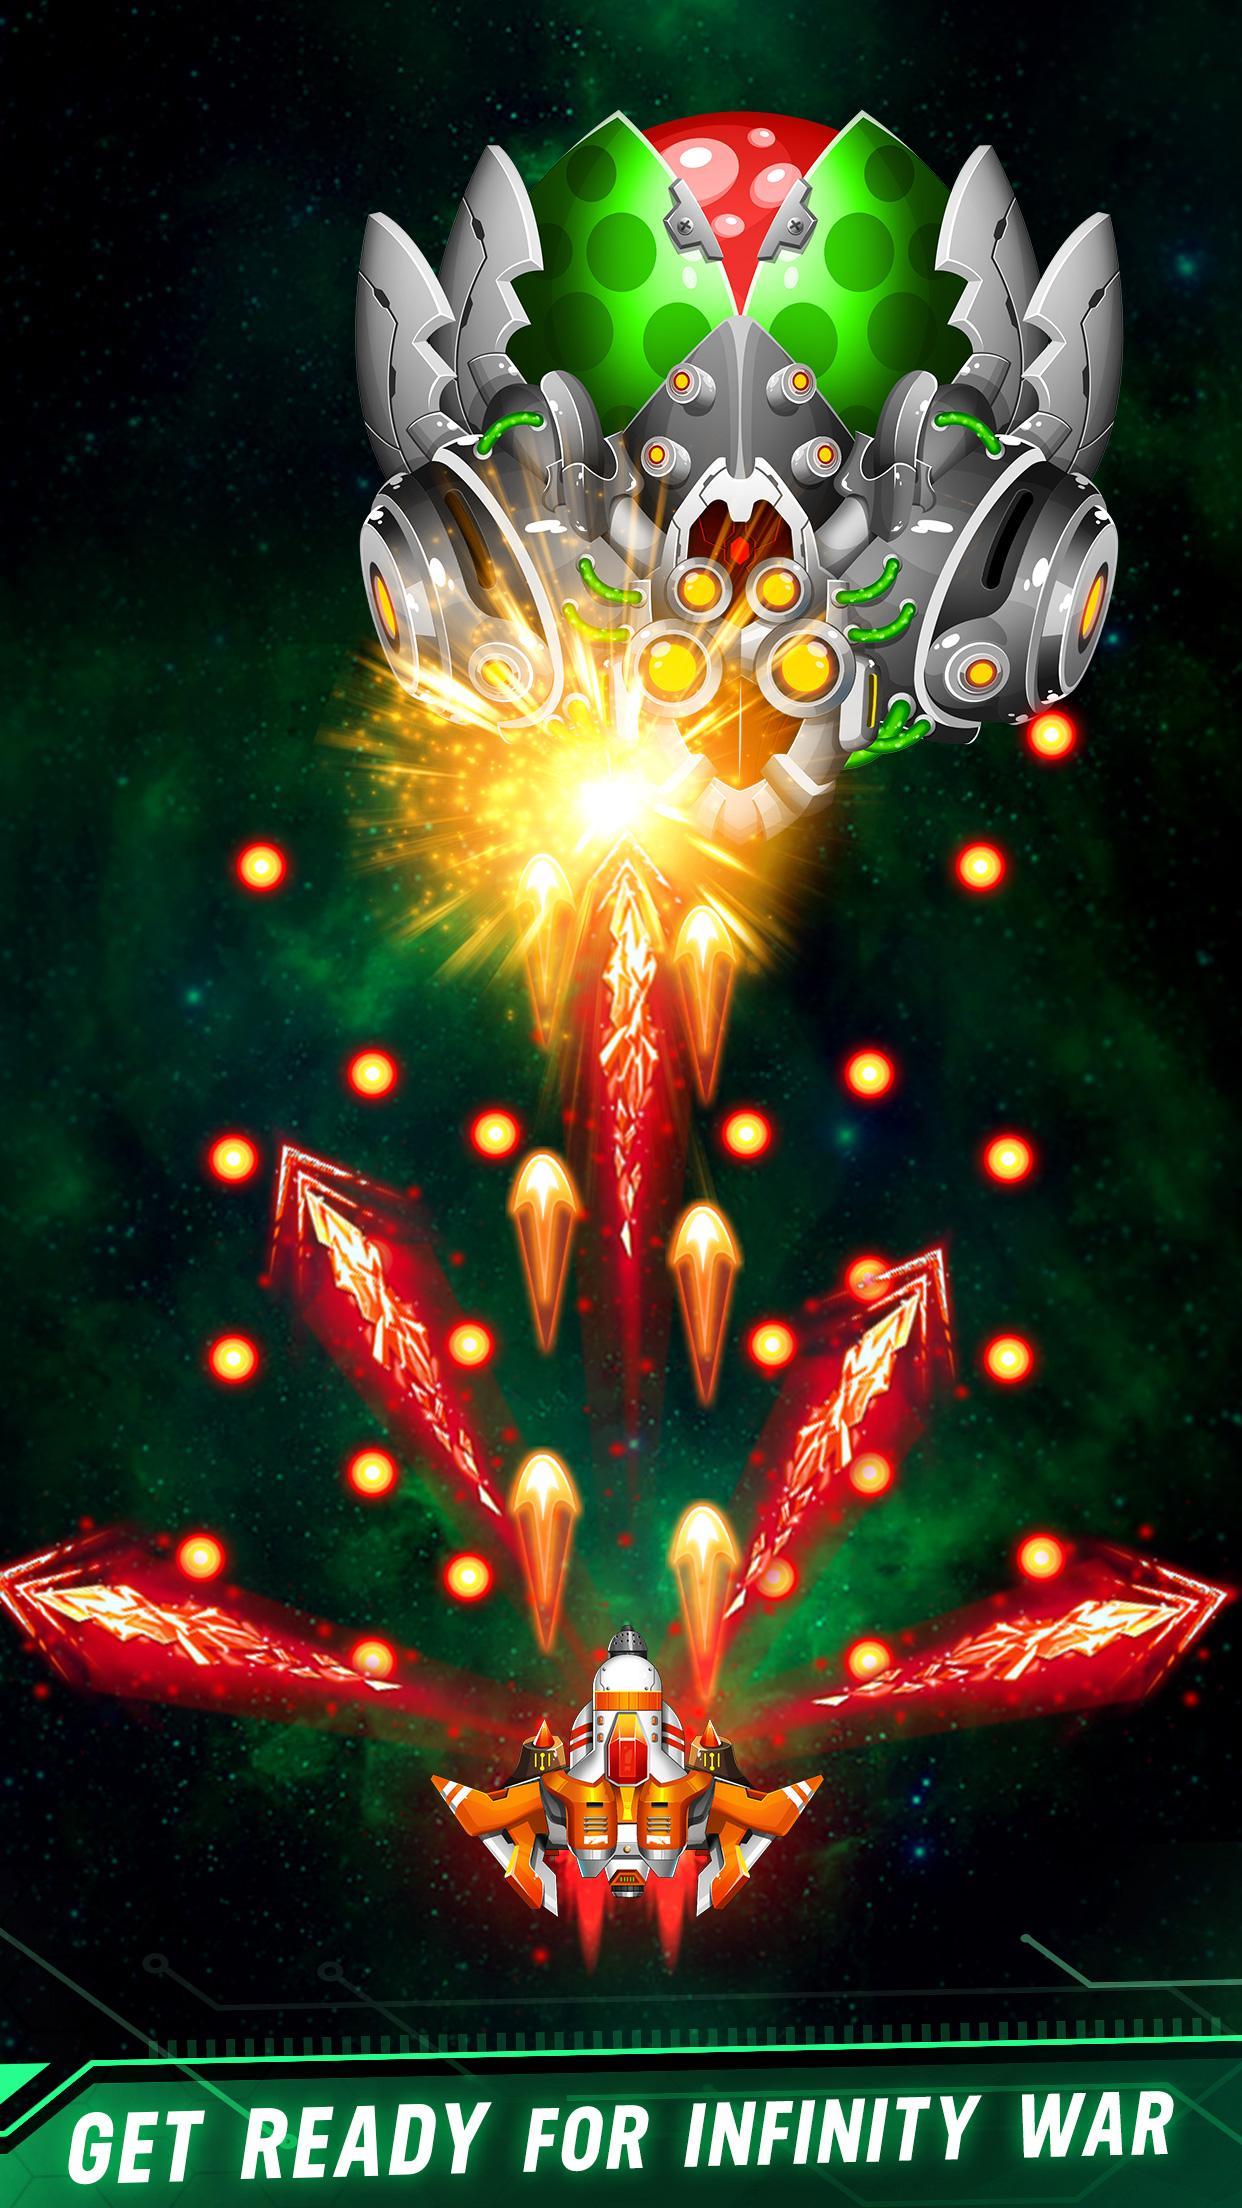 Space shooter - Galaxy attack - Galaxy shooter for Android - APK Download